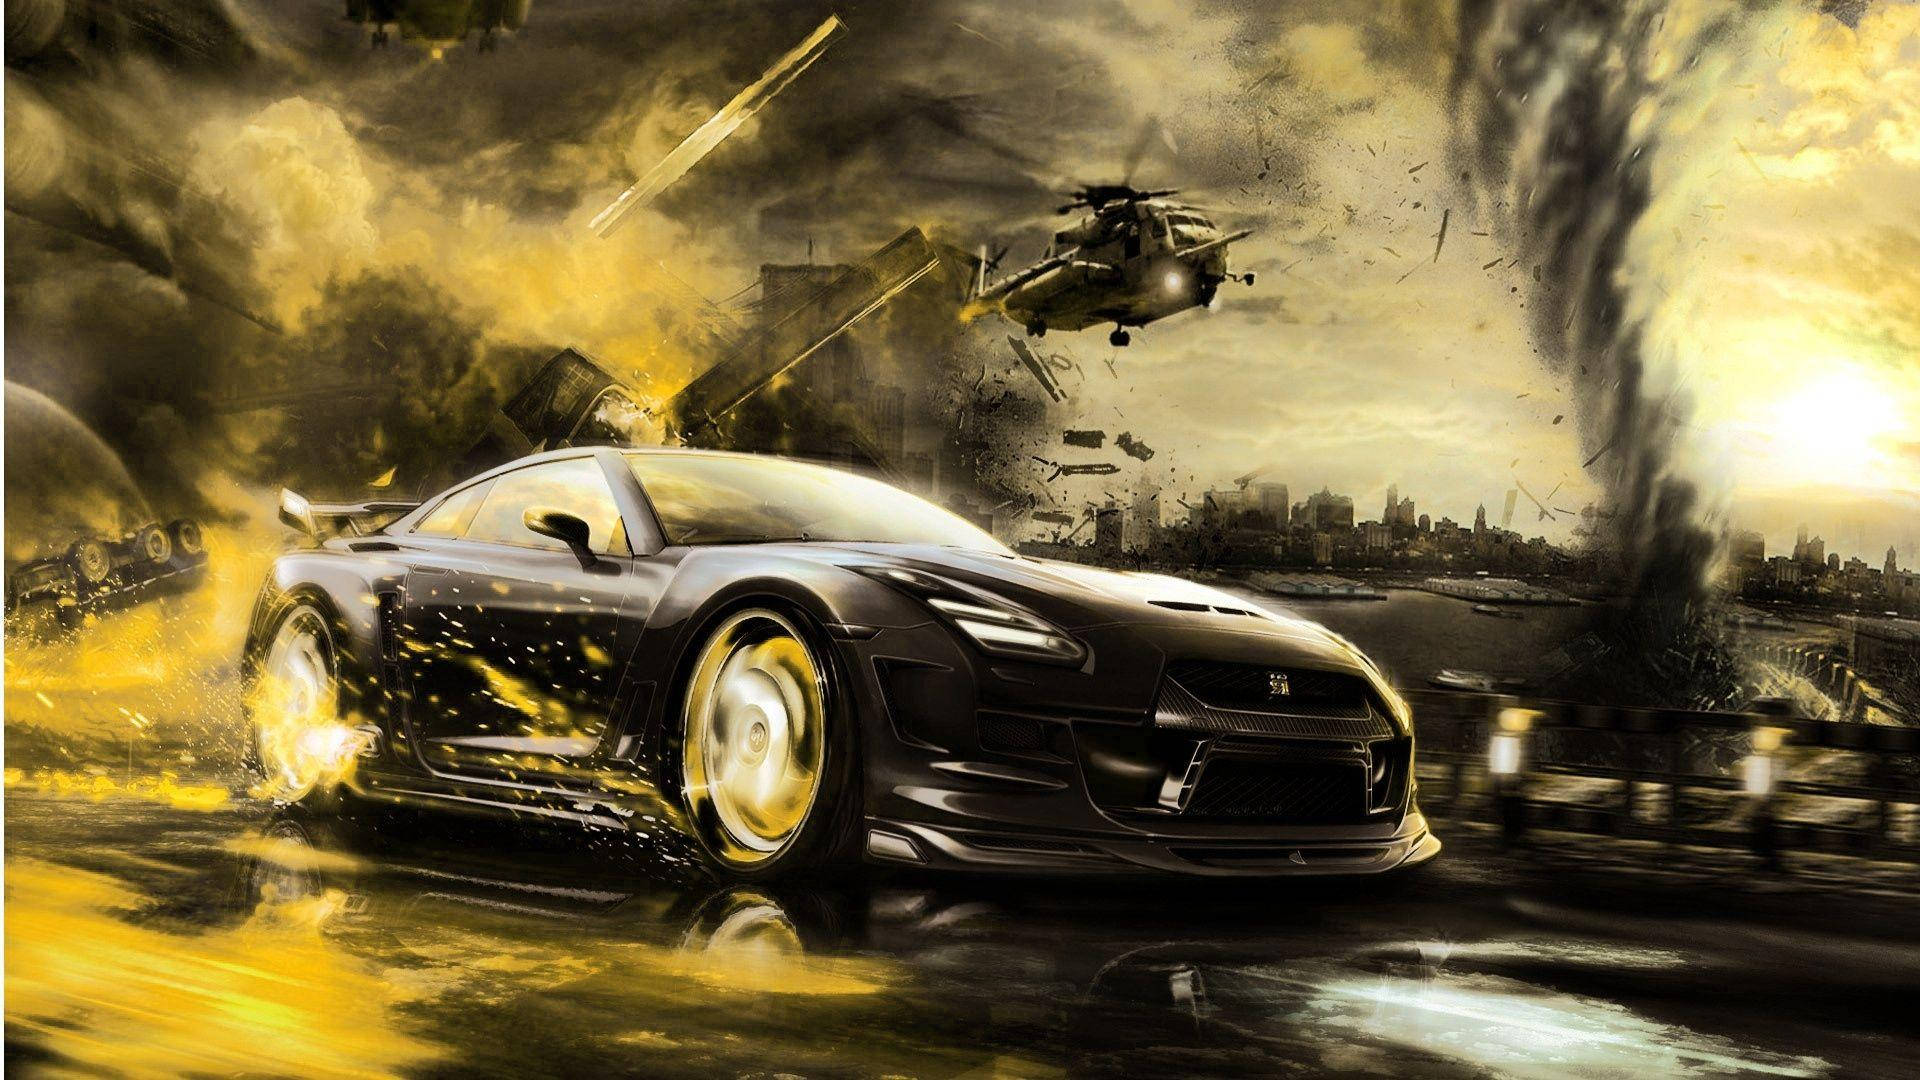 Full Hd Car And Helicopter Wallpaper